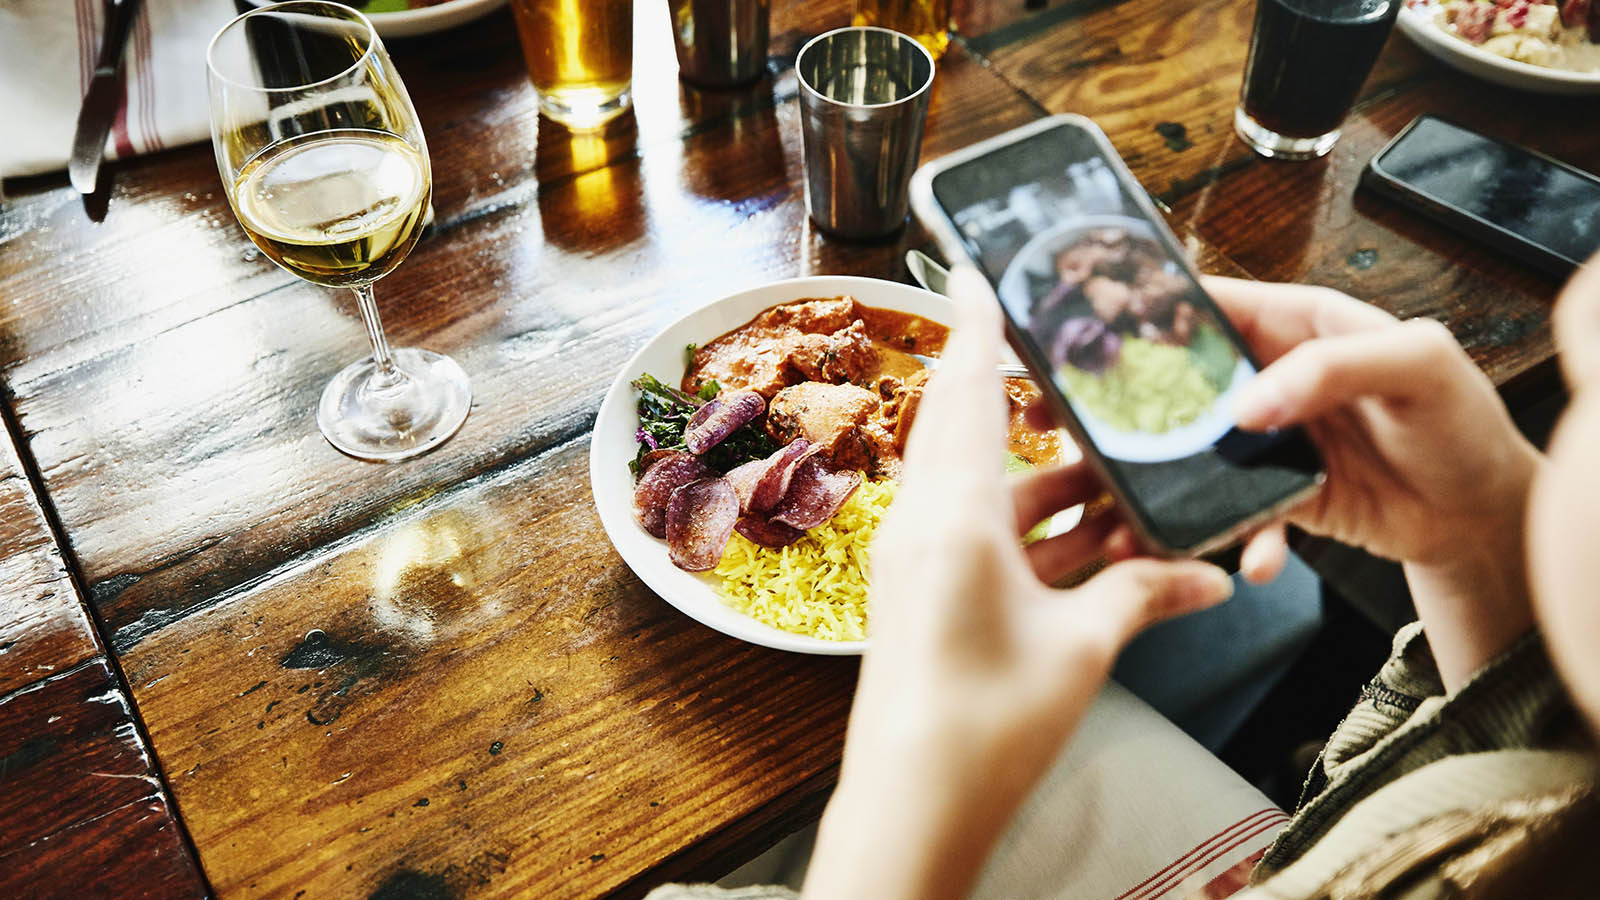 ClutterBug Quiz Woman Taking Photo Of Food With Smartphone While Having Lunch With Friends In Restaurant